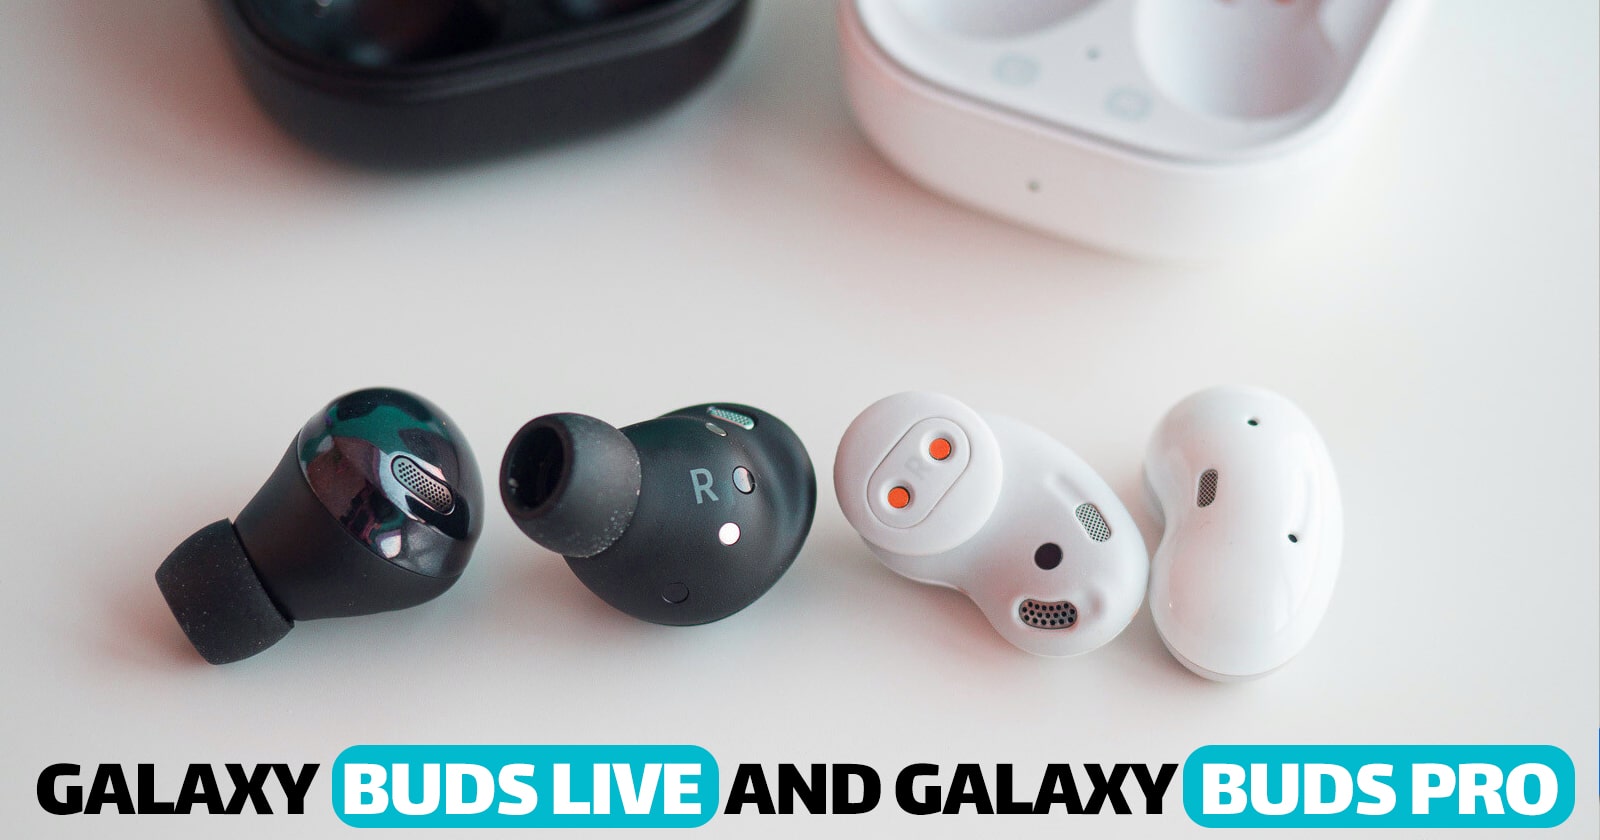 What Is the Difference Between Galaxy Buds Live and Galaxy Buds Pro